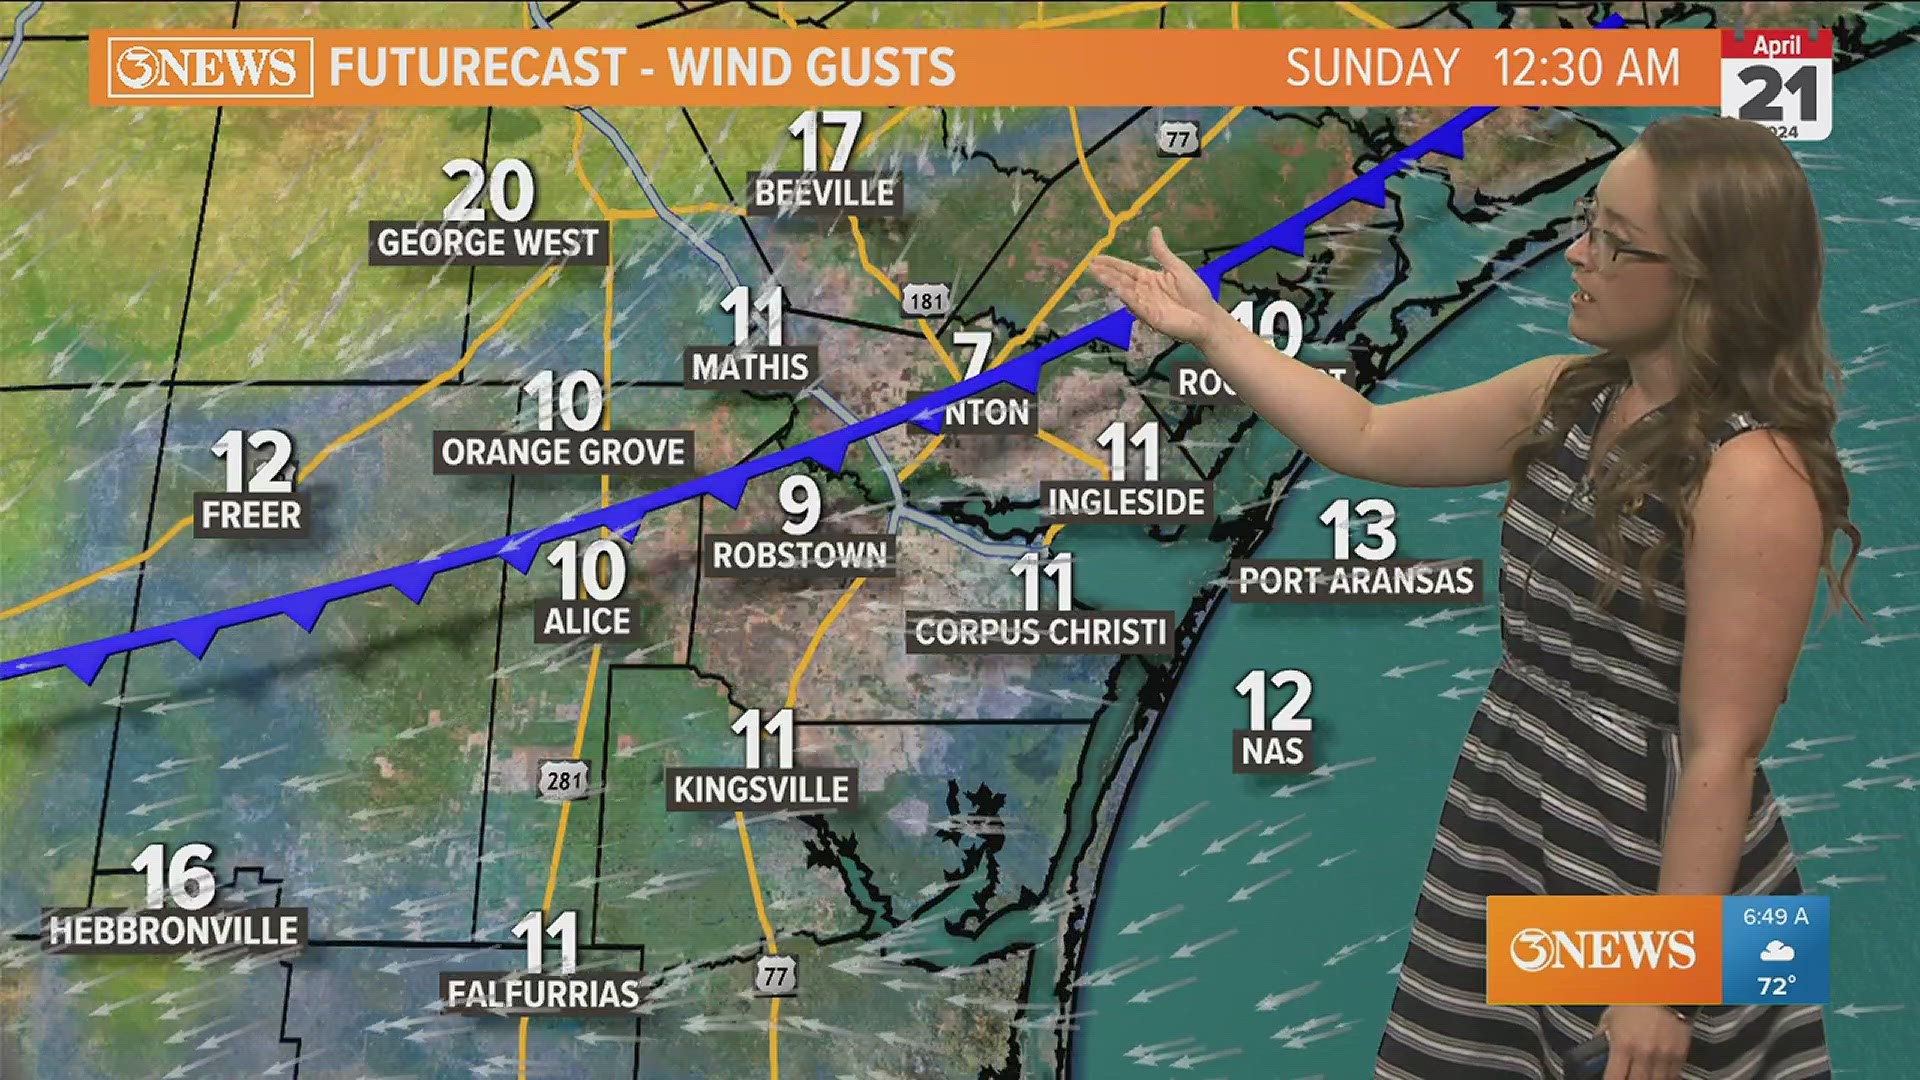 This front will bring northerly wind and around a 8-12 degree temperature drop.